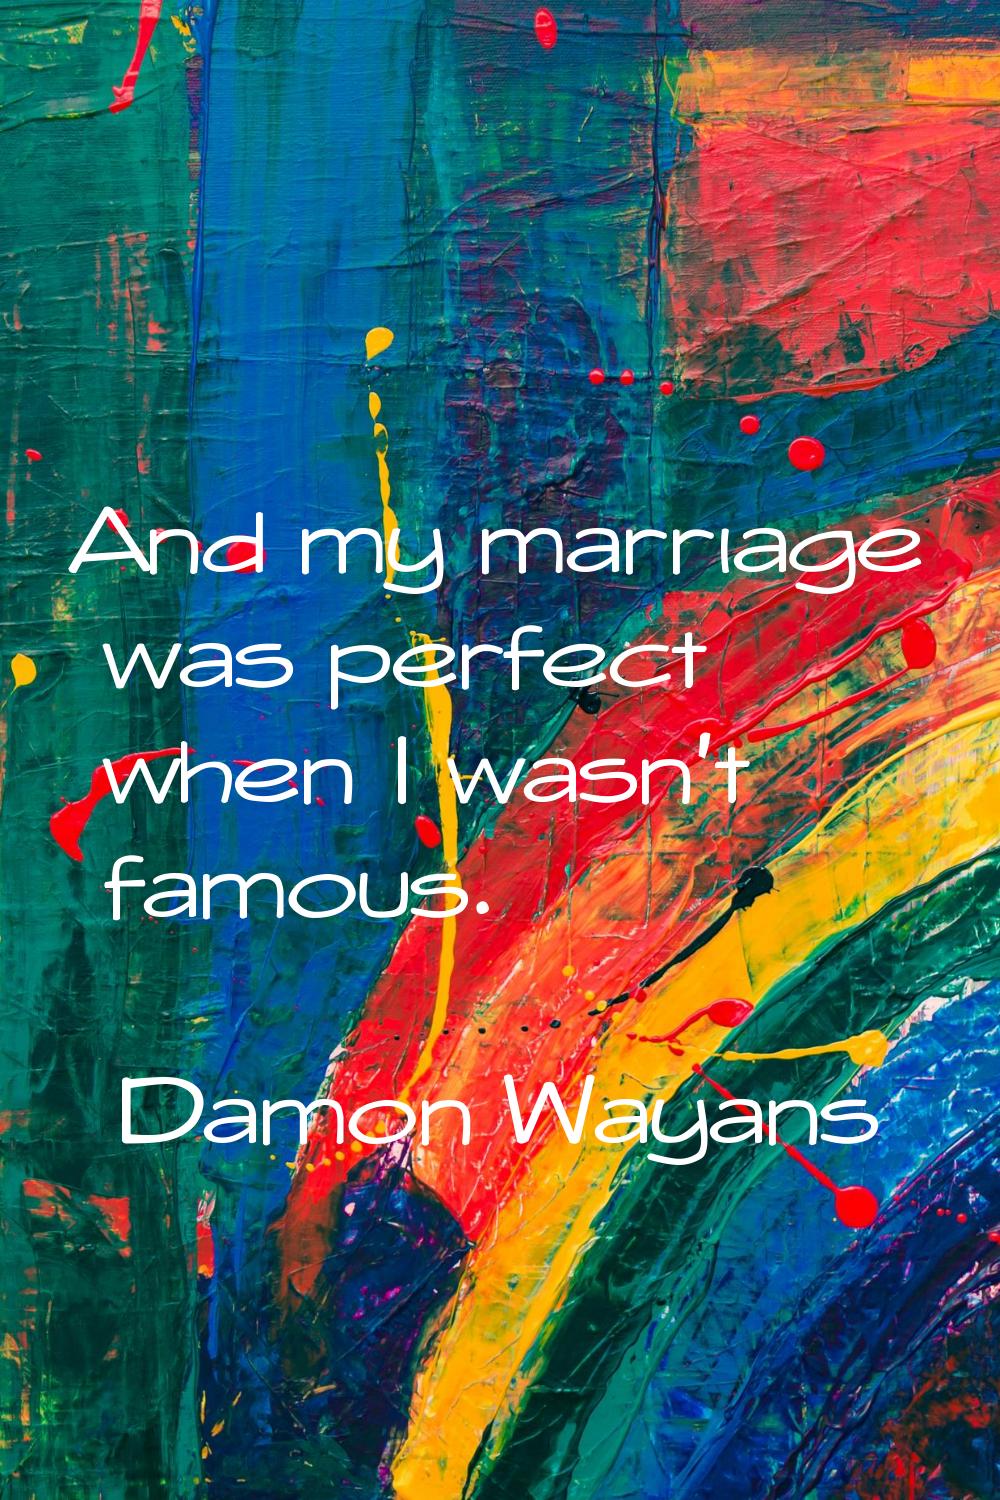 And my marriage was perfect when I wasn't famous.